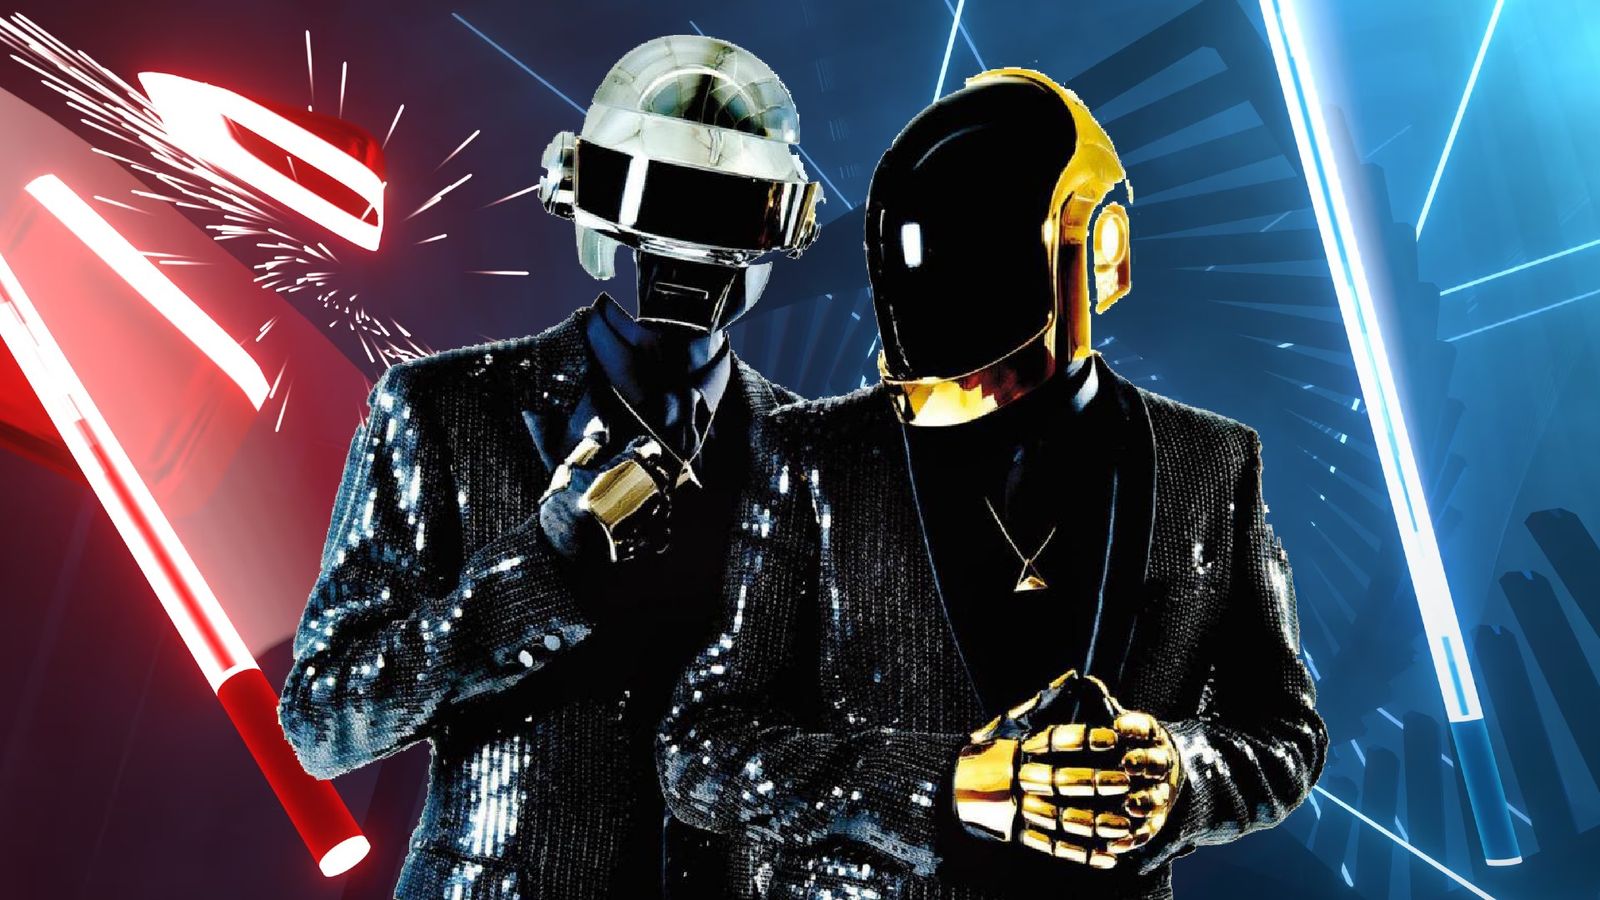 The Daft Punk duo in their iconic outfits in front of a Beat Saber image